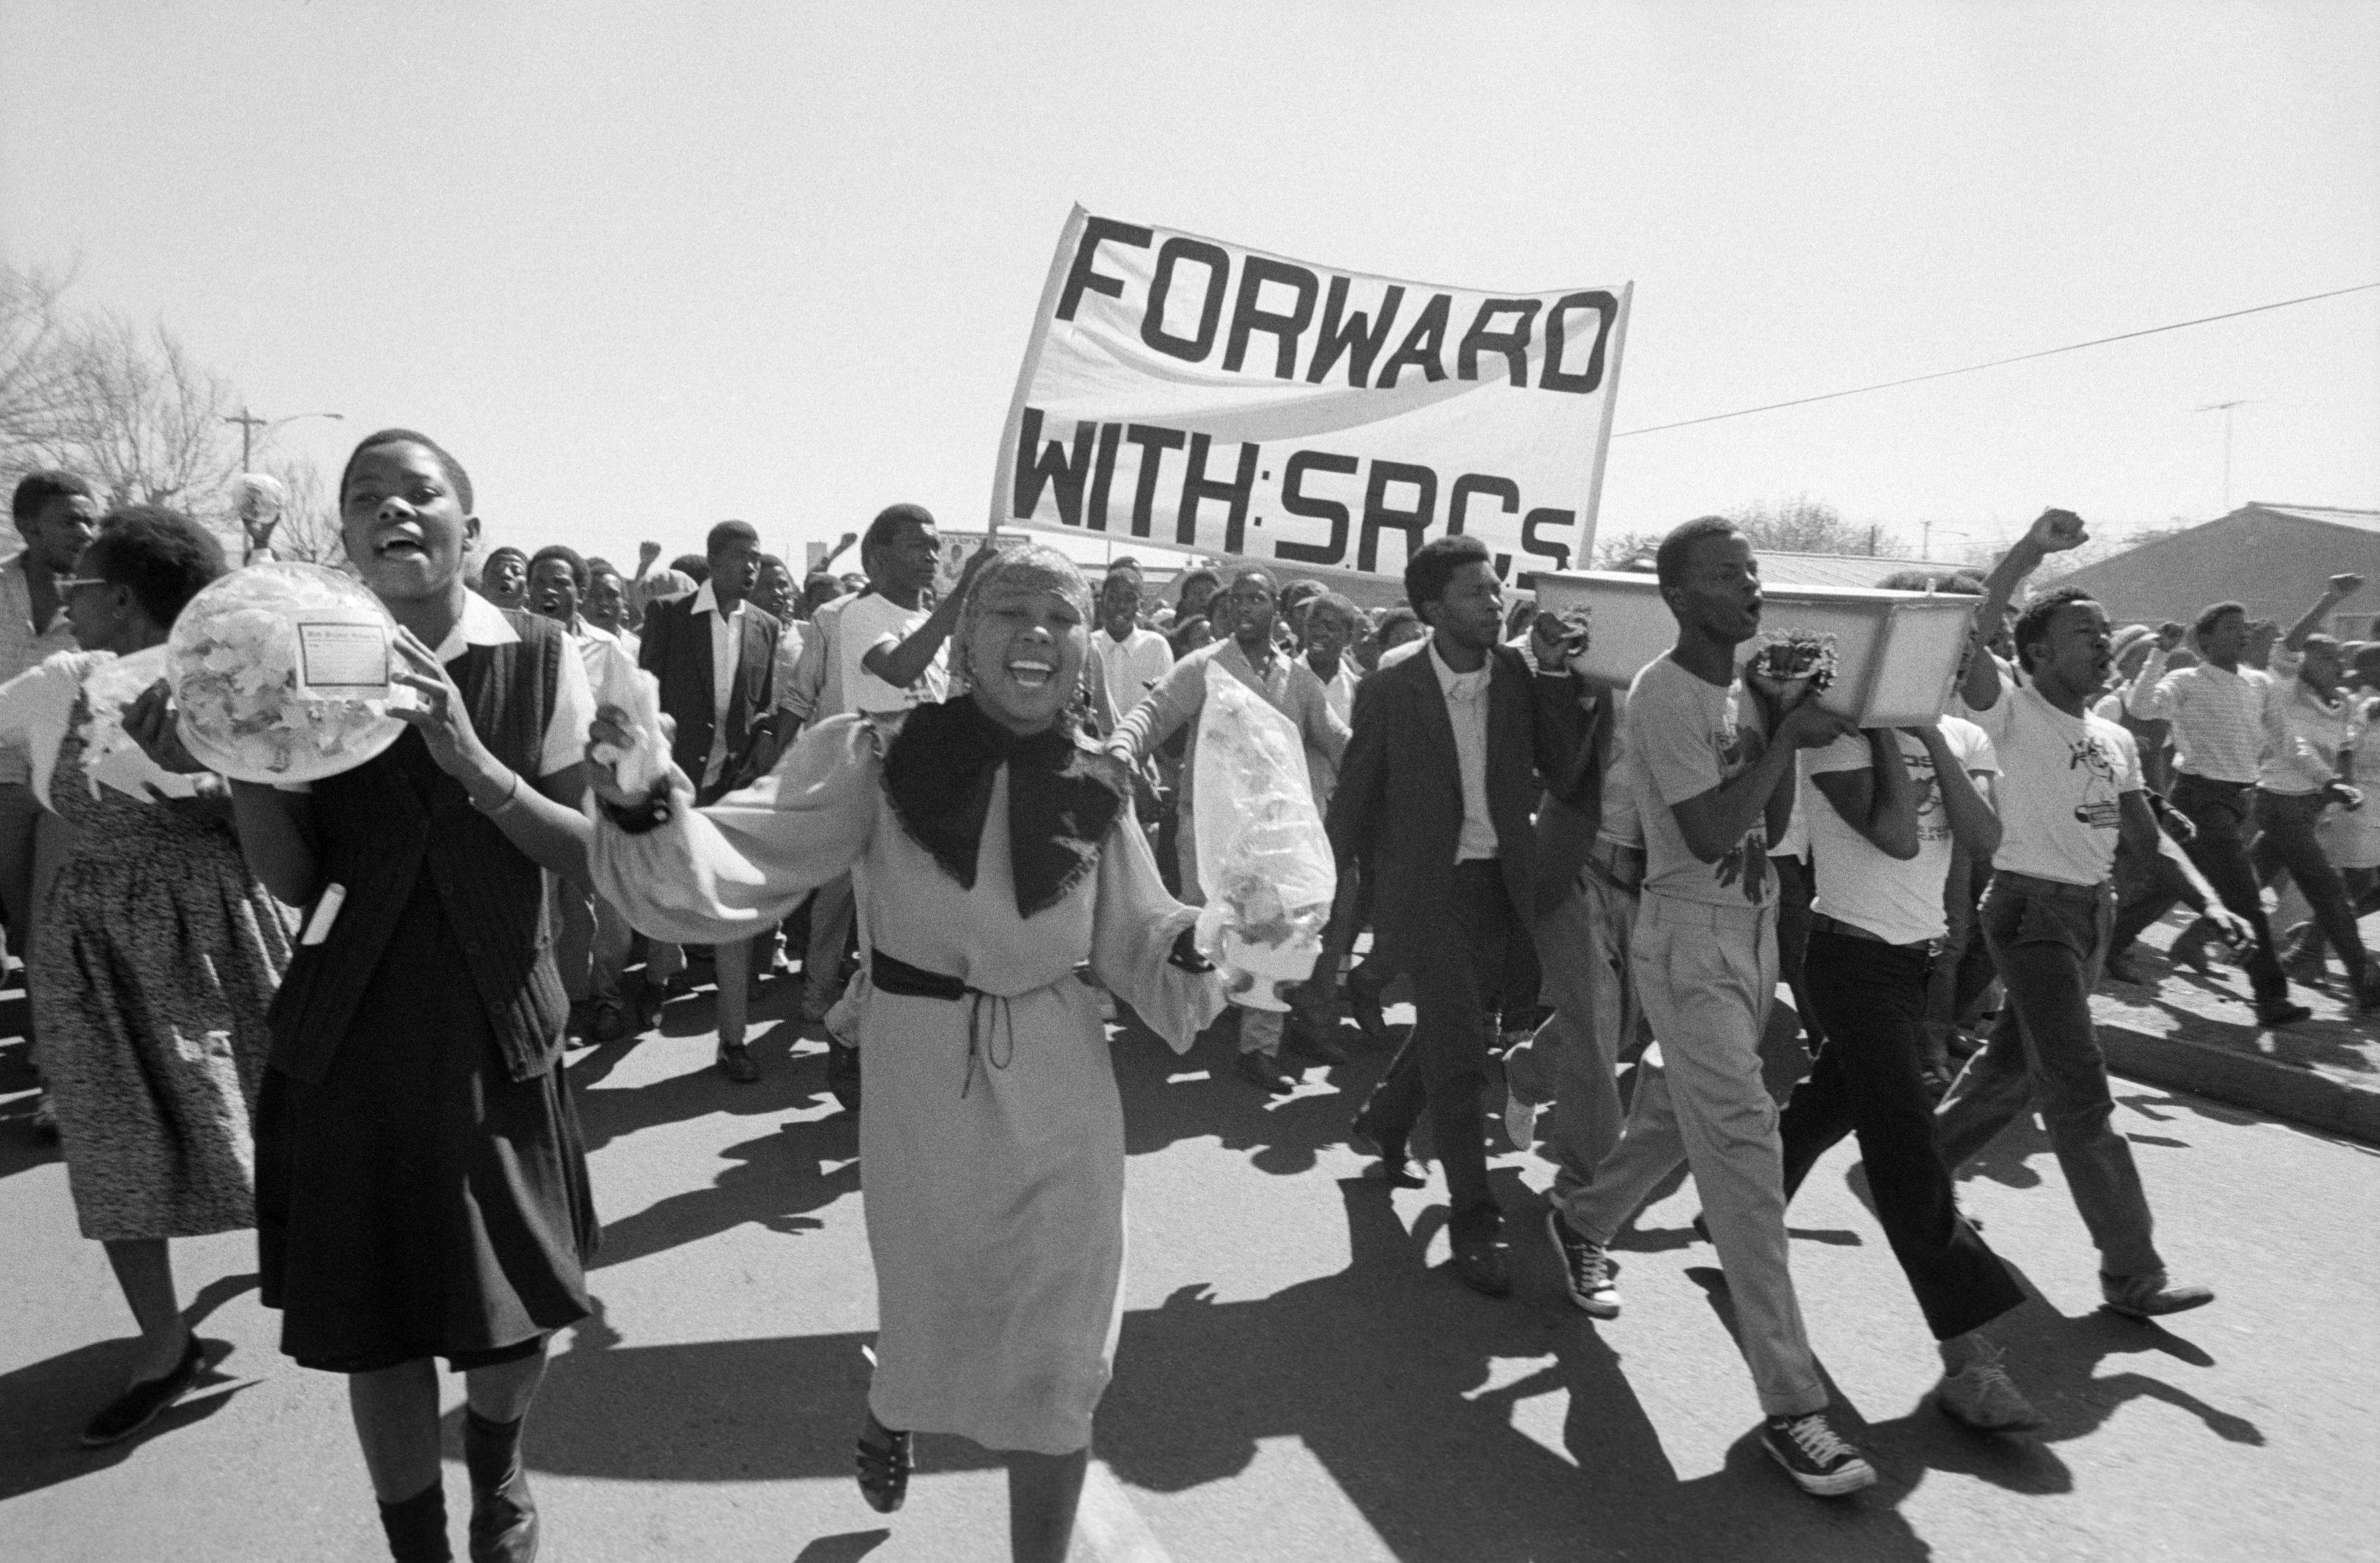 Students marching to cemetery with grave flowers, Wattville, Gauteng, 1984-09-09. Photograph by Gille de Vlieg. Archived as SAHA collection AL3274_B22.2